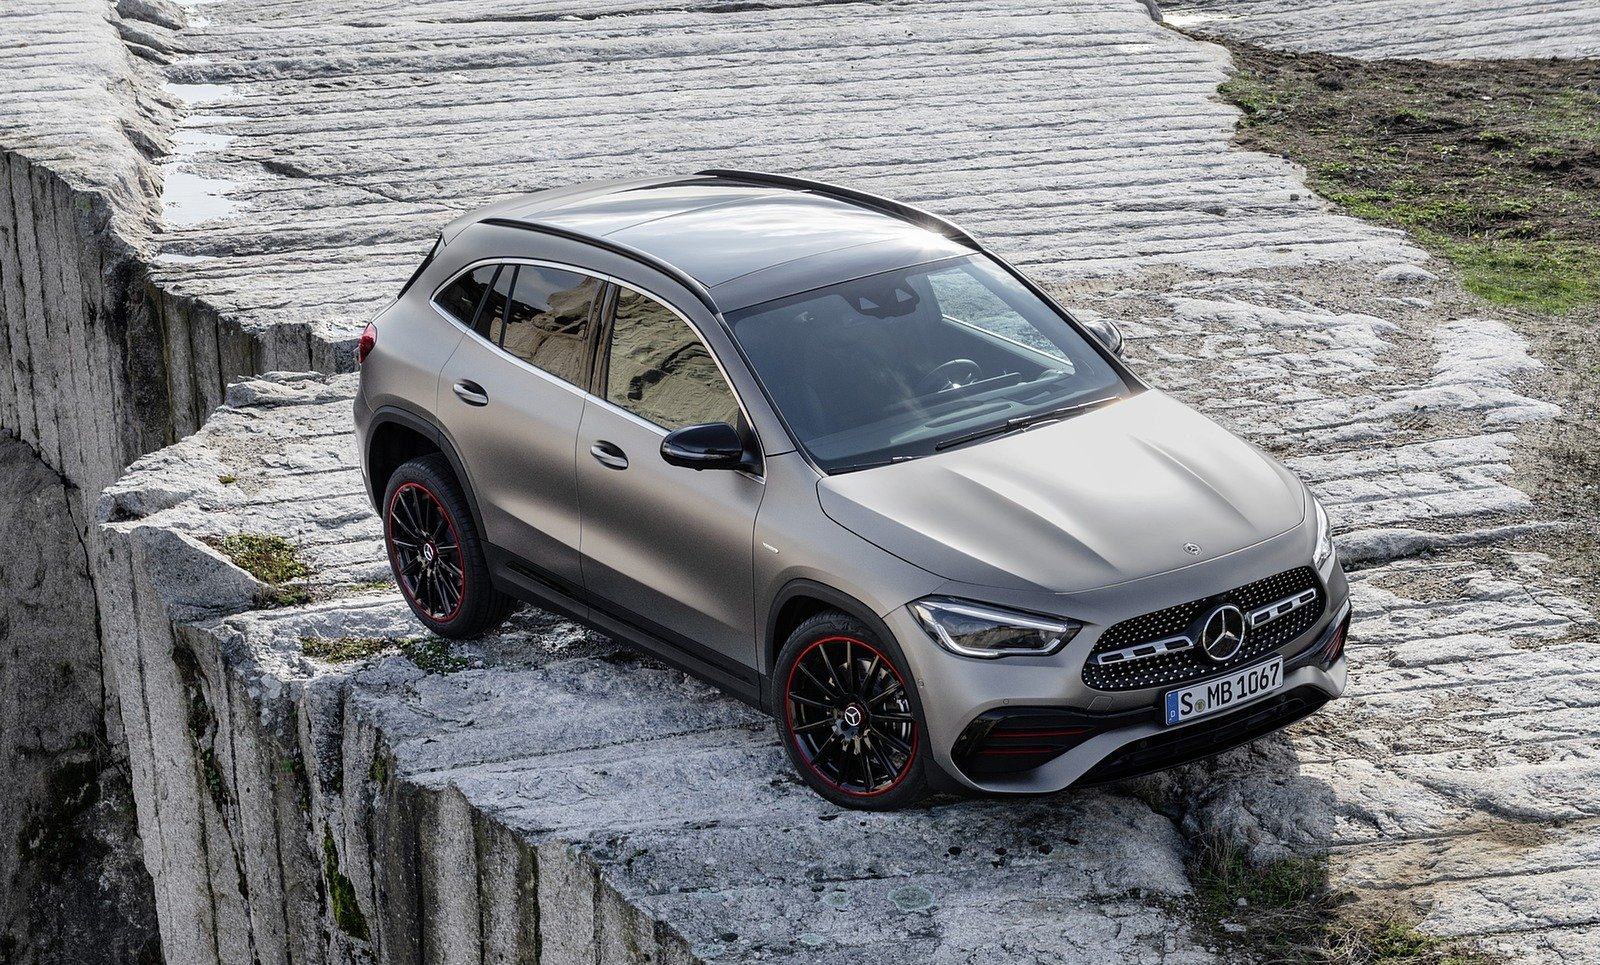 Mercedes Gla Suv 21 Top 10 Things You Need To Know About It